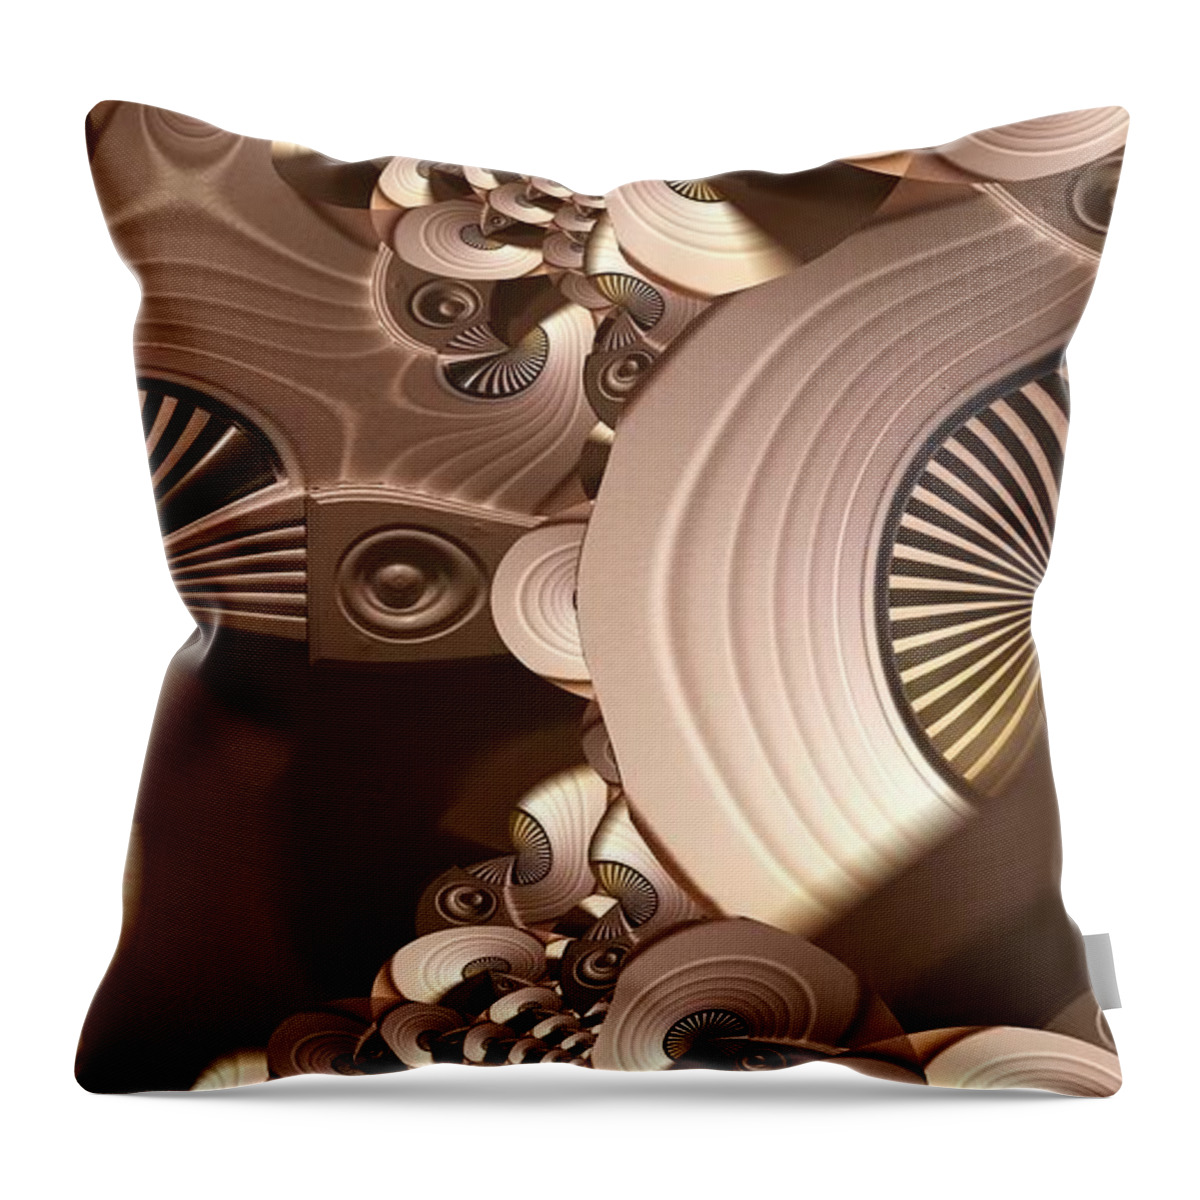 Collage Throw Pillow featuring the digital art Trimmed #1 by Ronald Bissett